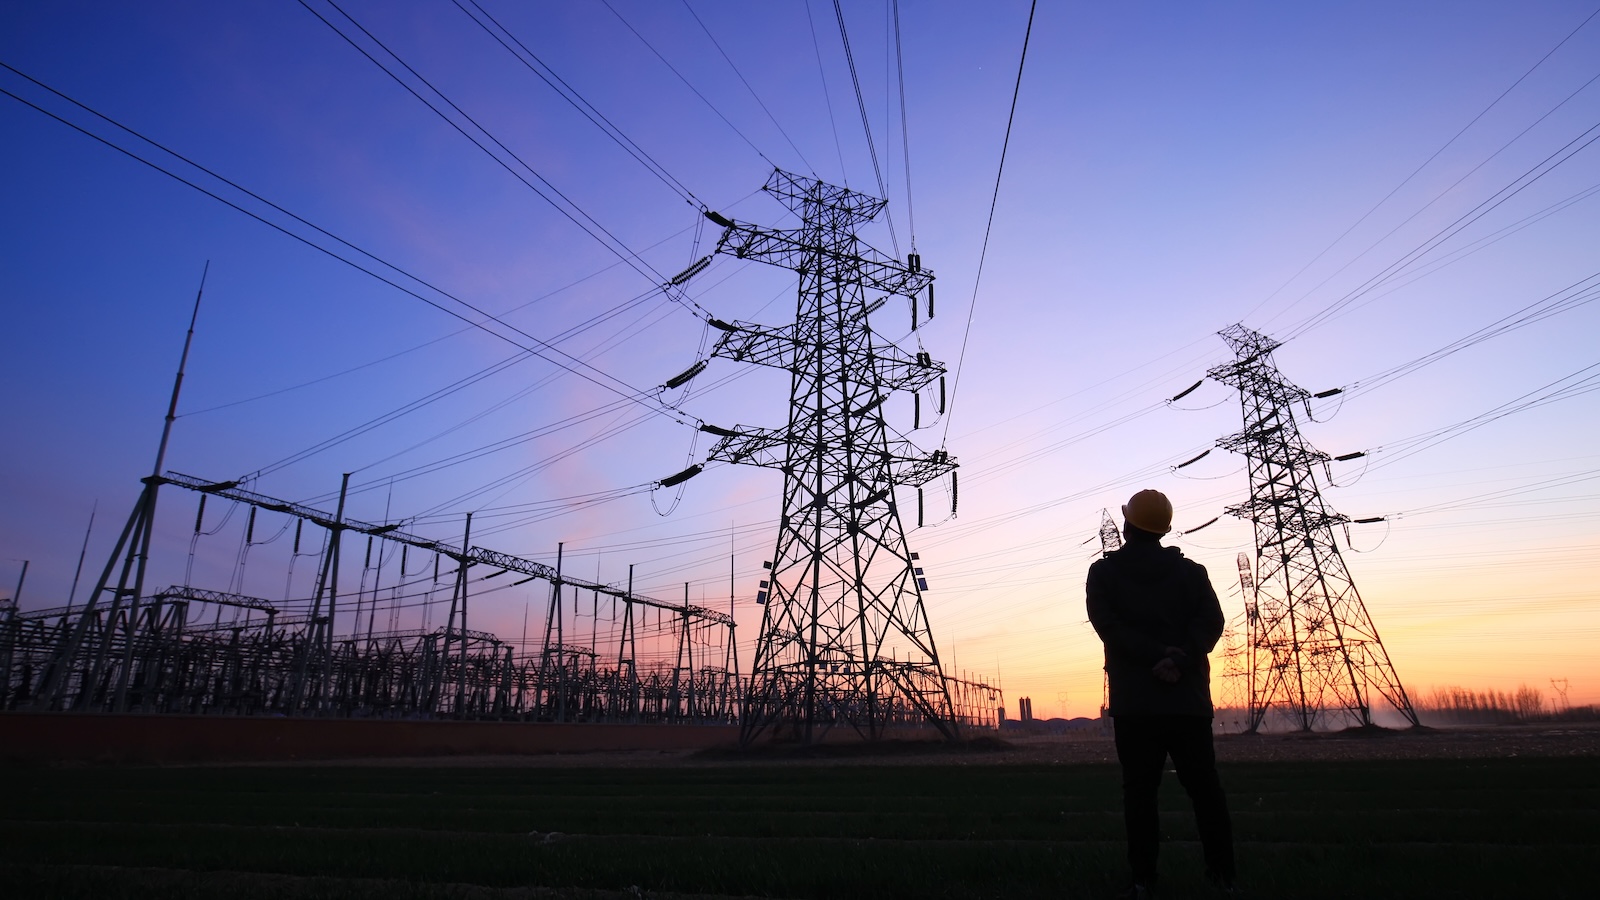 An electric utility worker inspects a transmission tower at dusk.